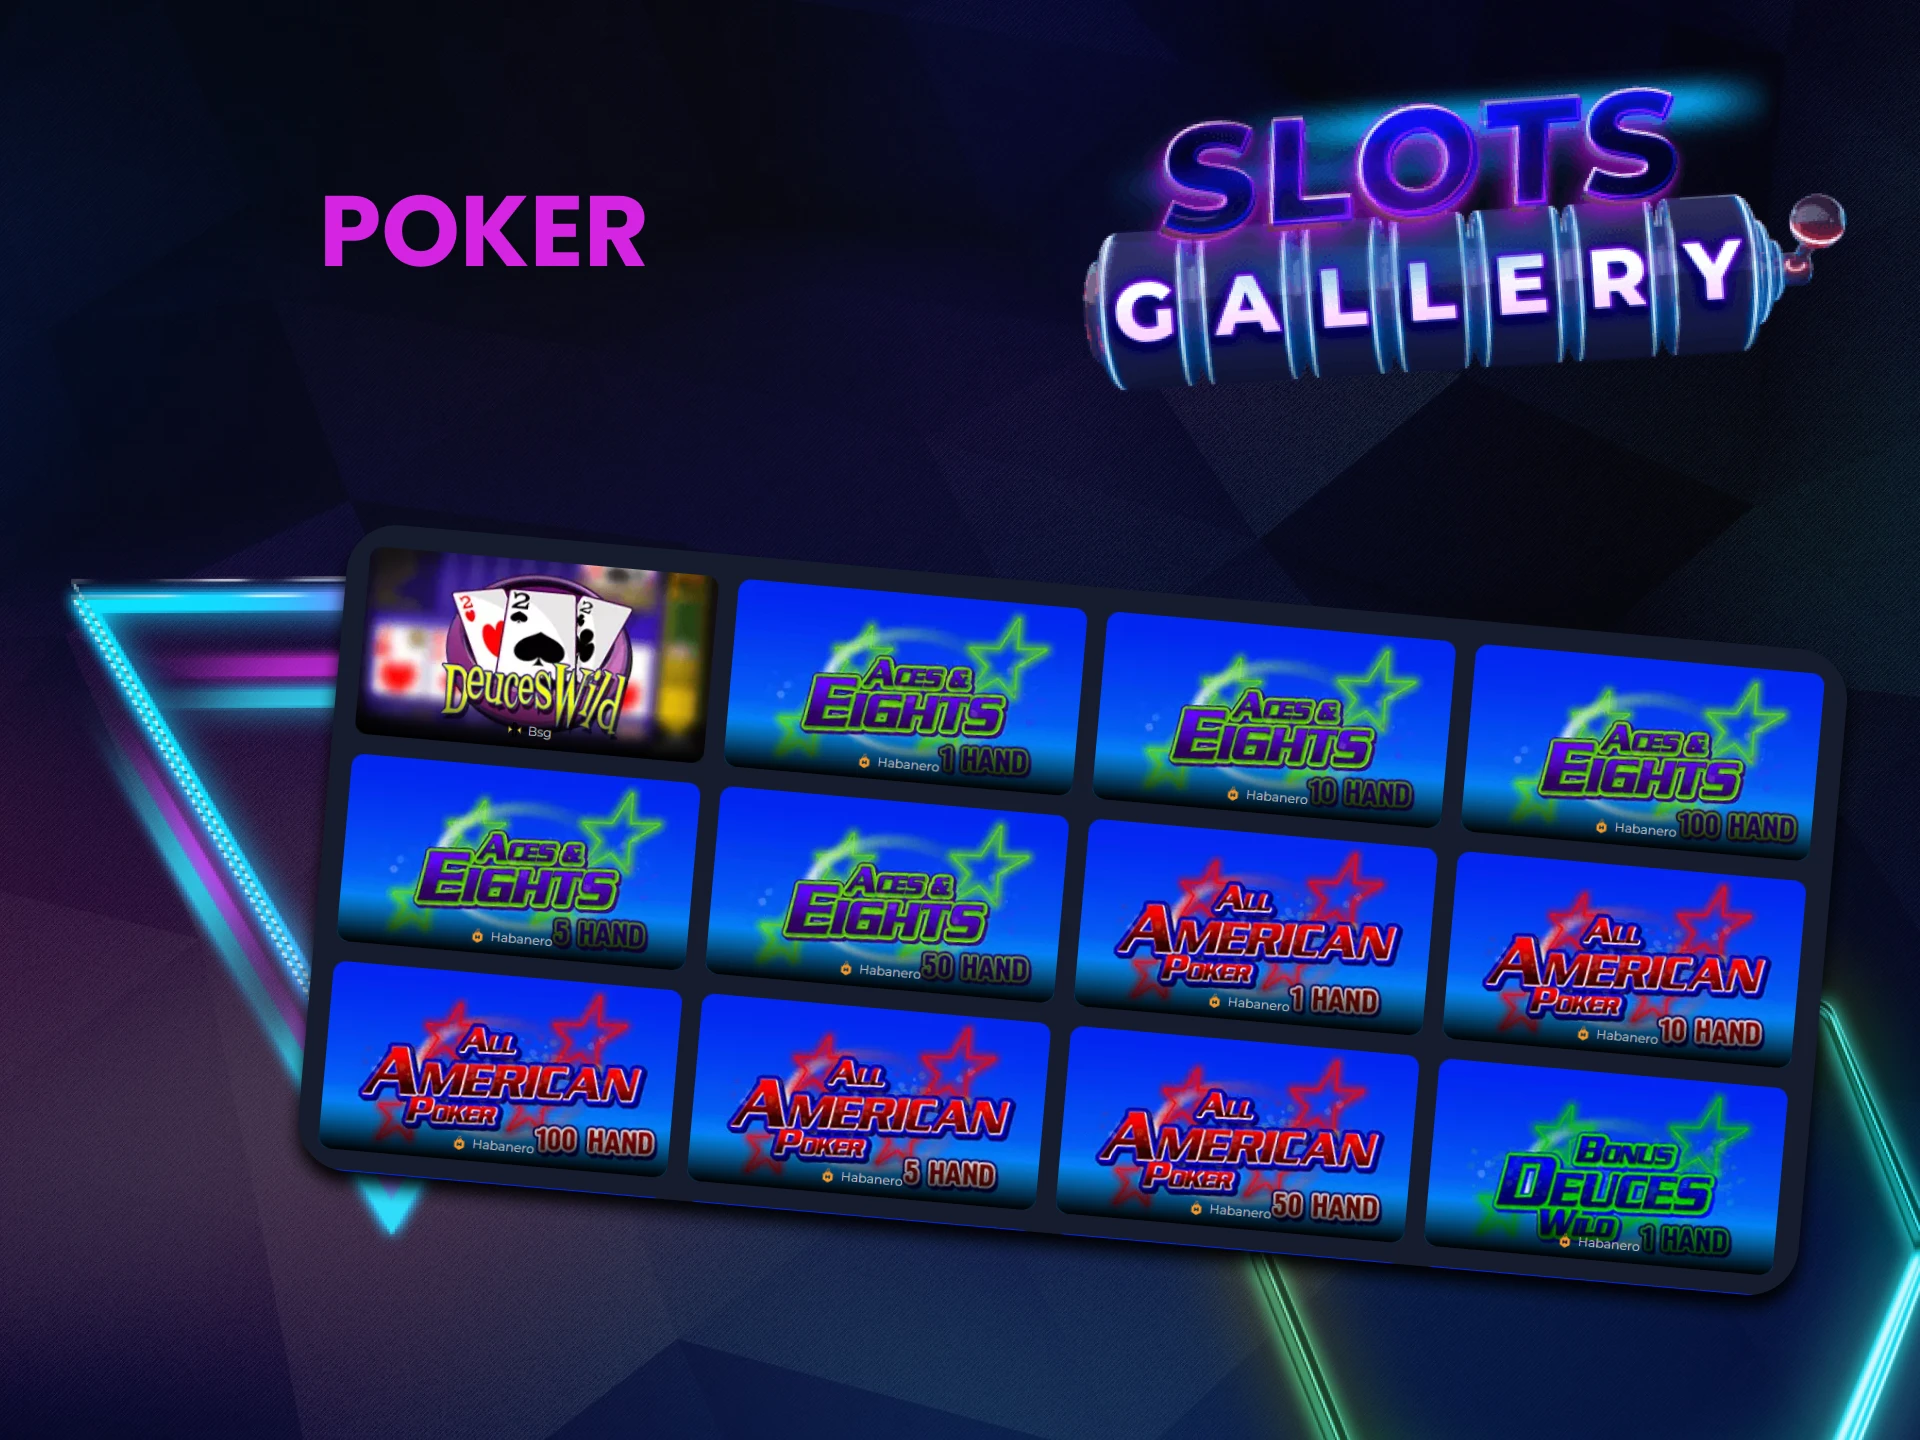 For casino games from SlotsGallery, choose the Poker section.